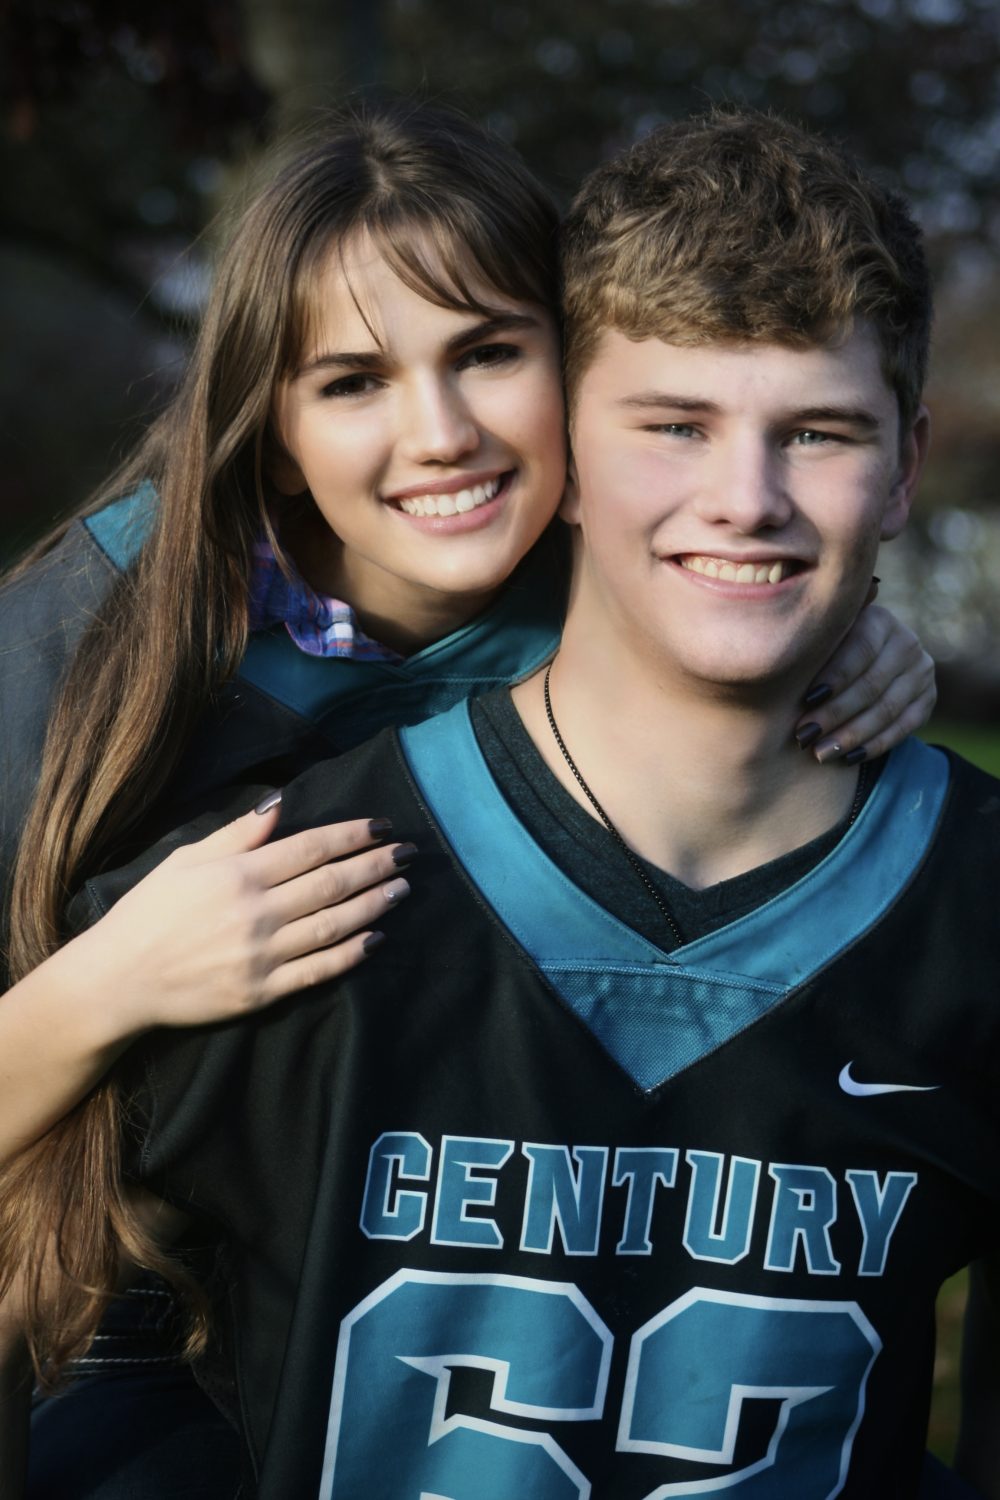 A photograph of a young couple, which includes my friend and his girlfriend in football jerseys to represent my friends number on the team. And the special bond and overall joy they have.